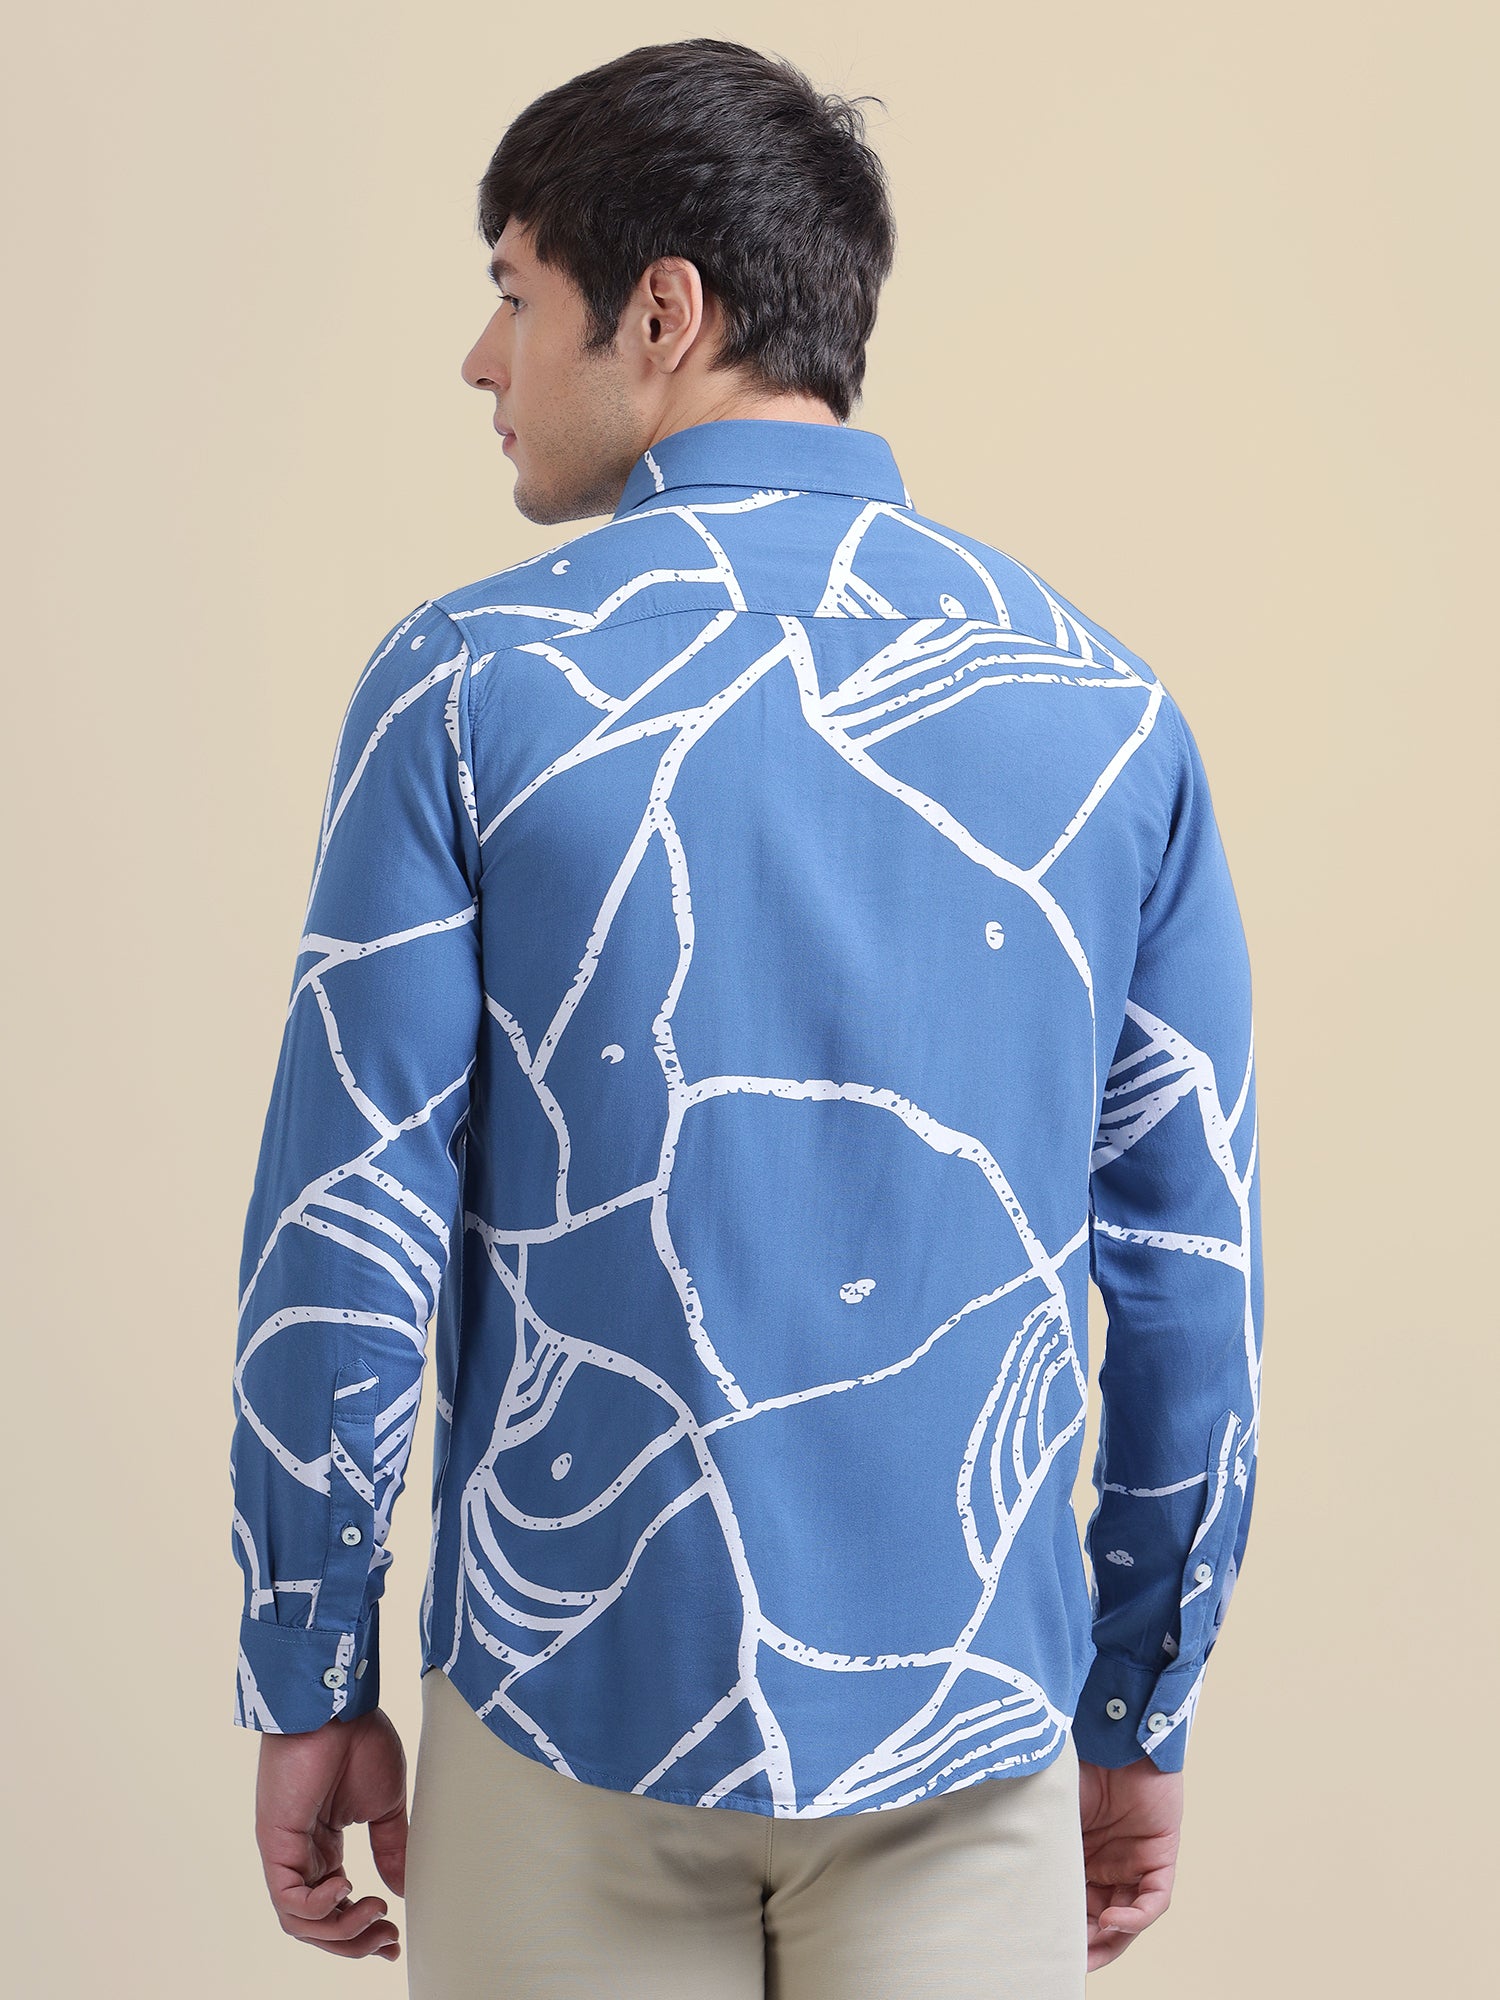 Abstract Printed Premium Shirt For Men's In Rayon Fabric